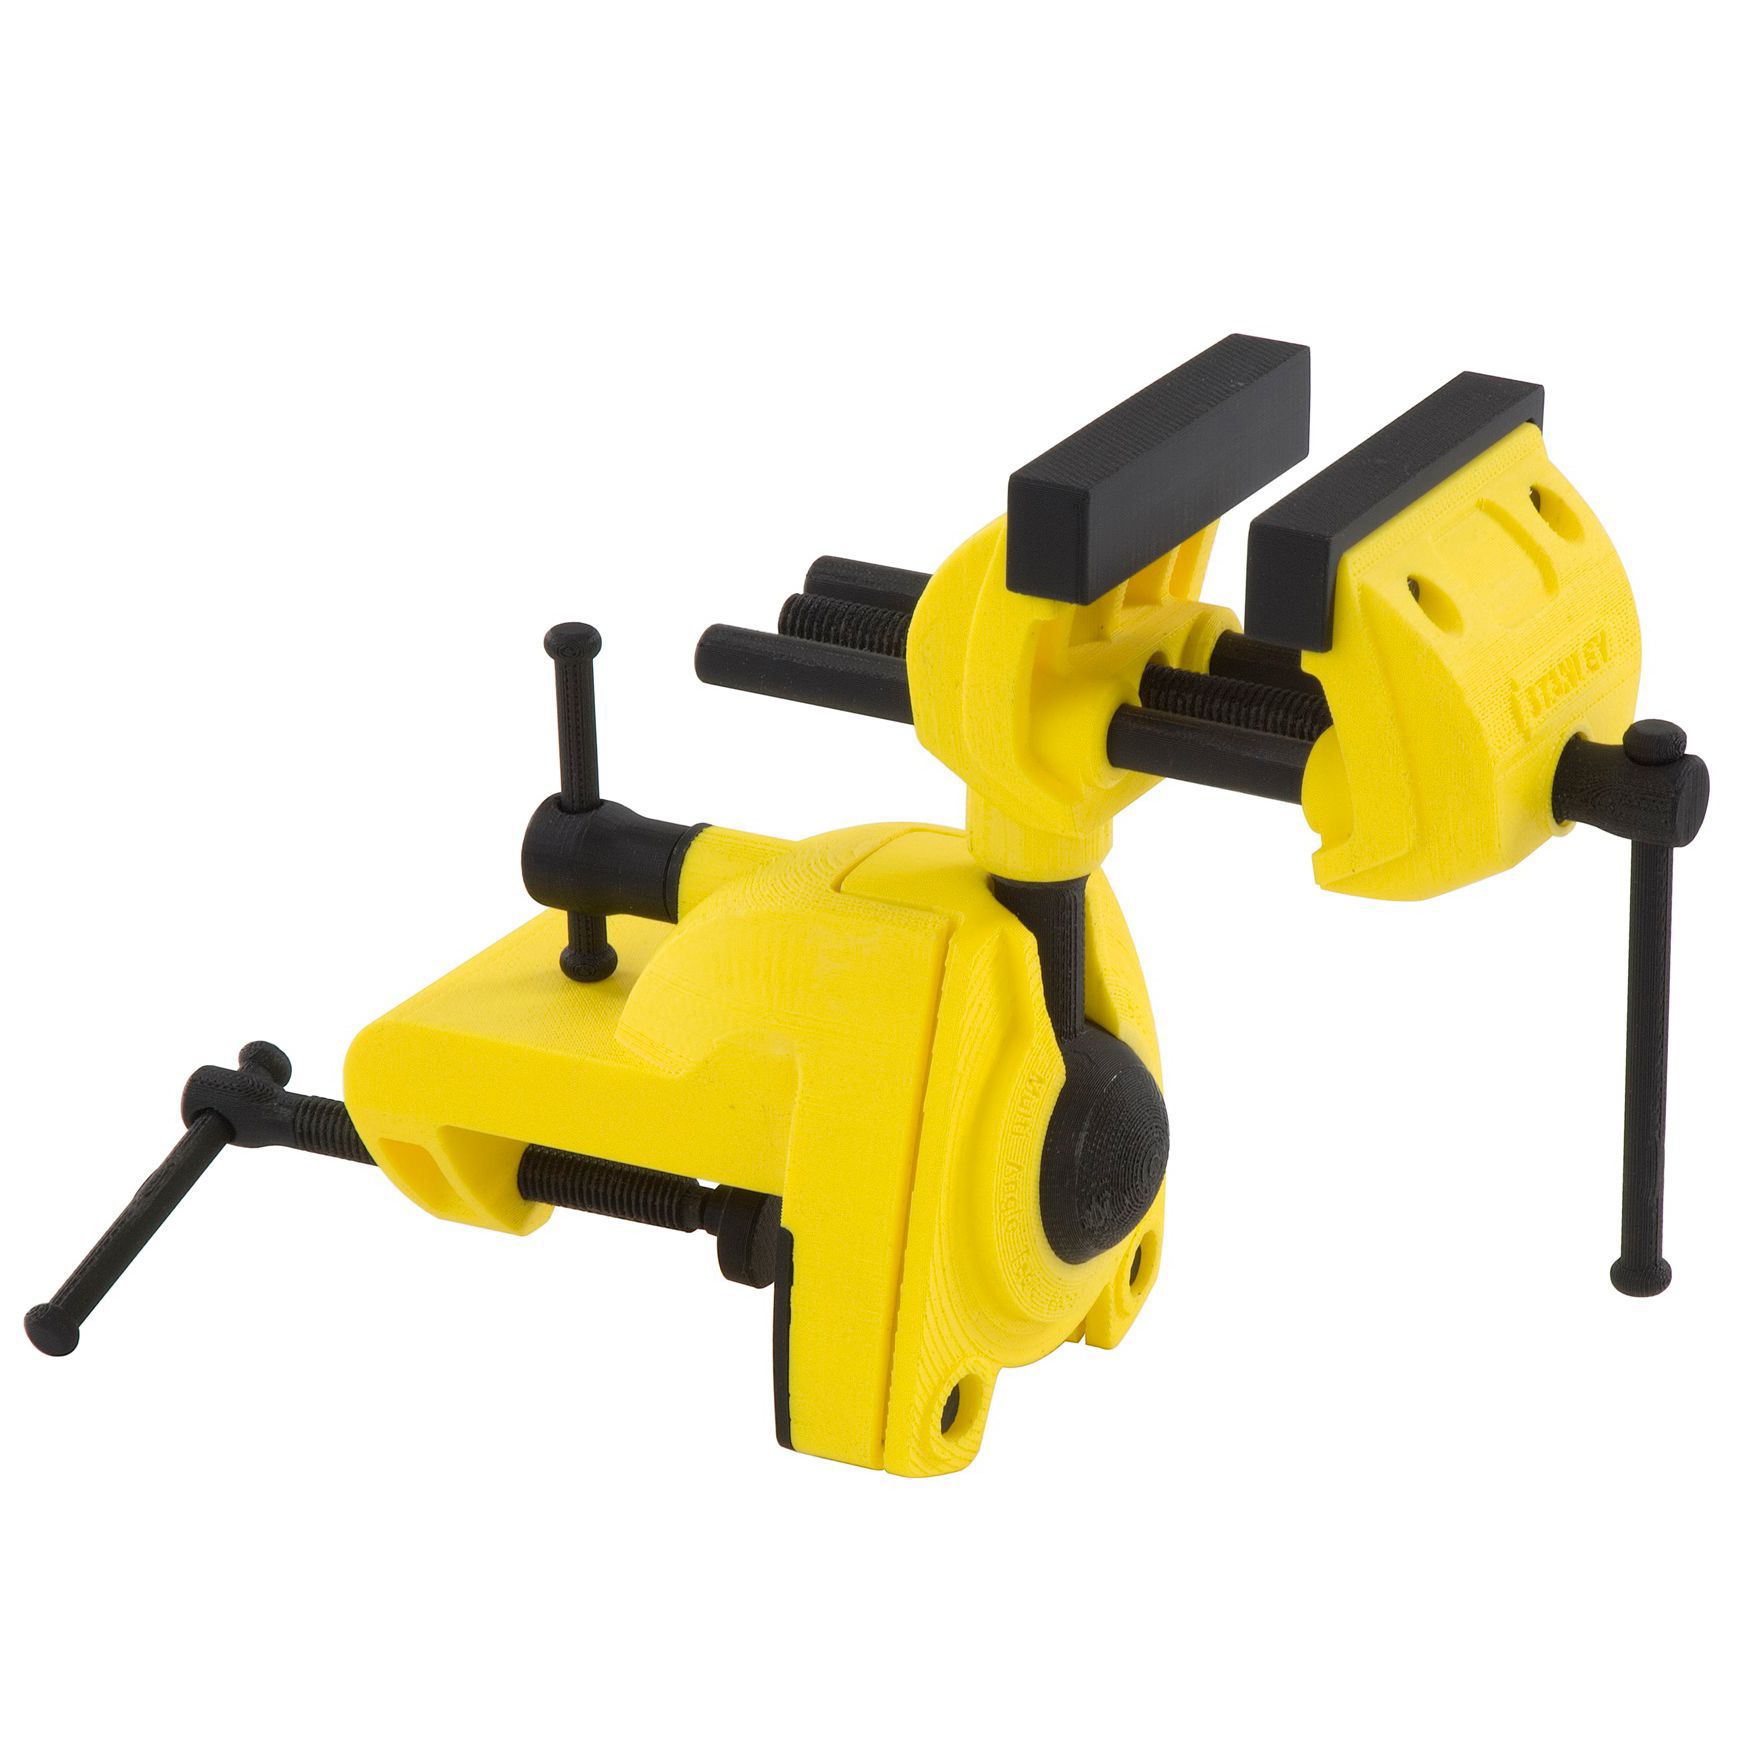 Stanley Multi-angle vice